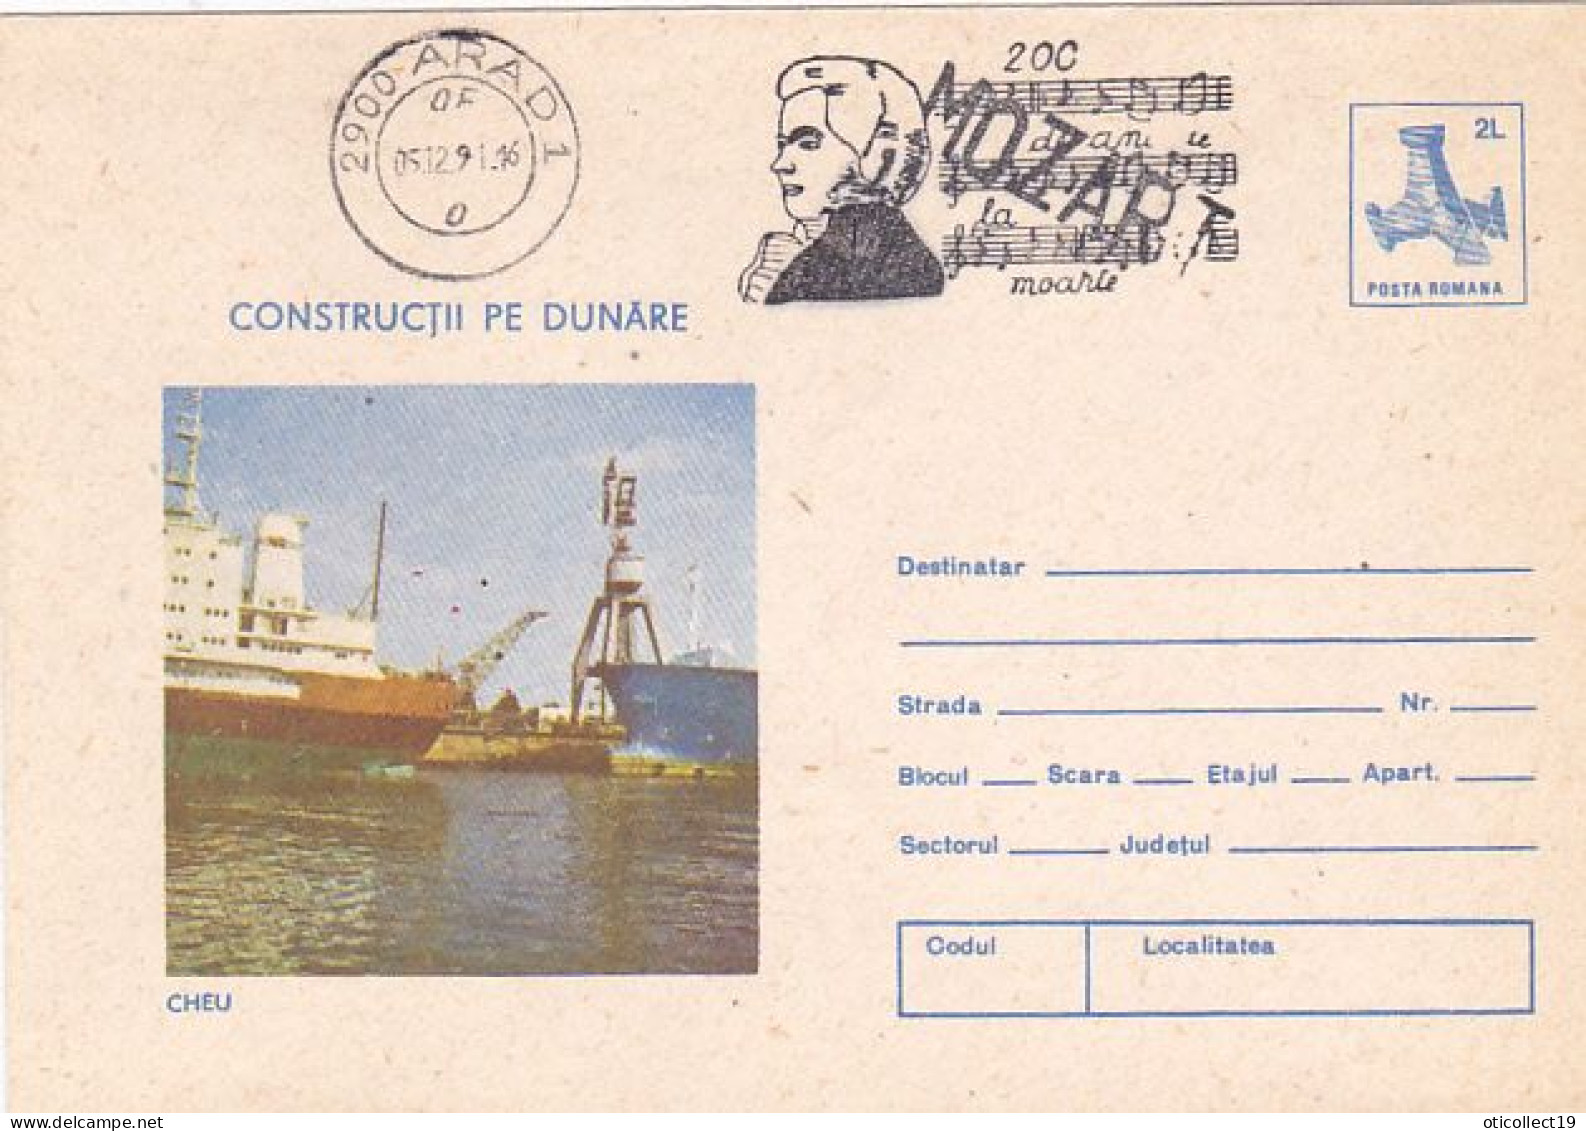 MUSIC, W.A. MOZART, COMPOSER, SPECIAL POSTMARK ON SHIPS COVER STATIONERY, 1991, ROMANIA - Musique